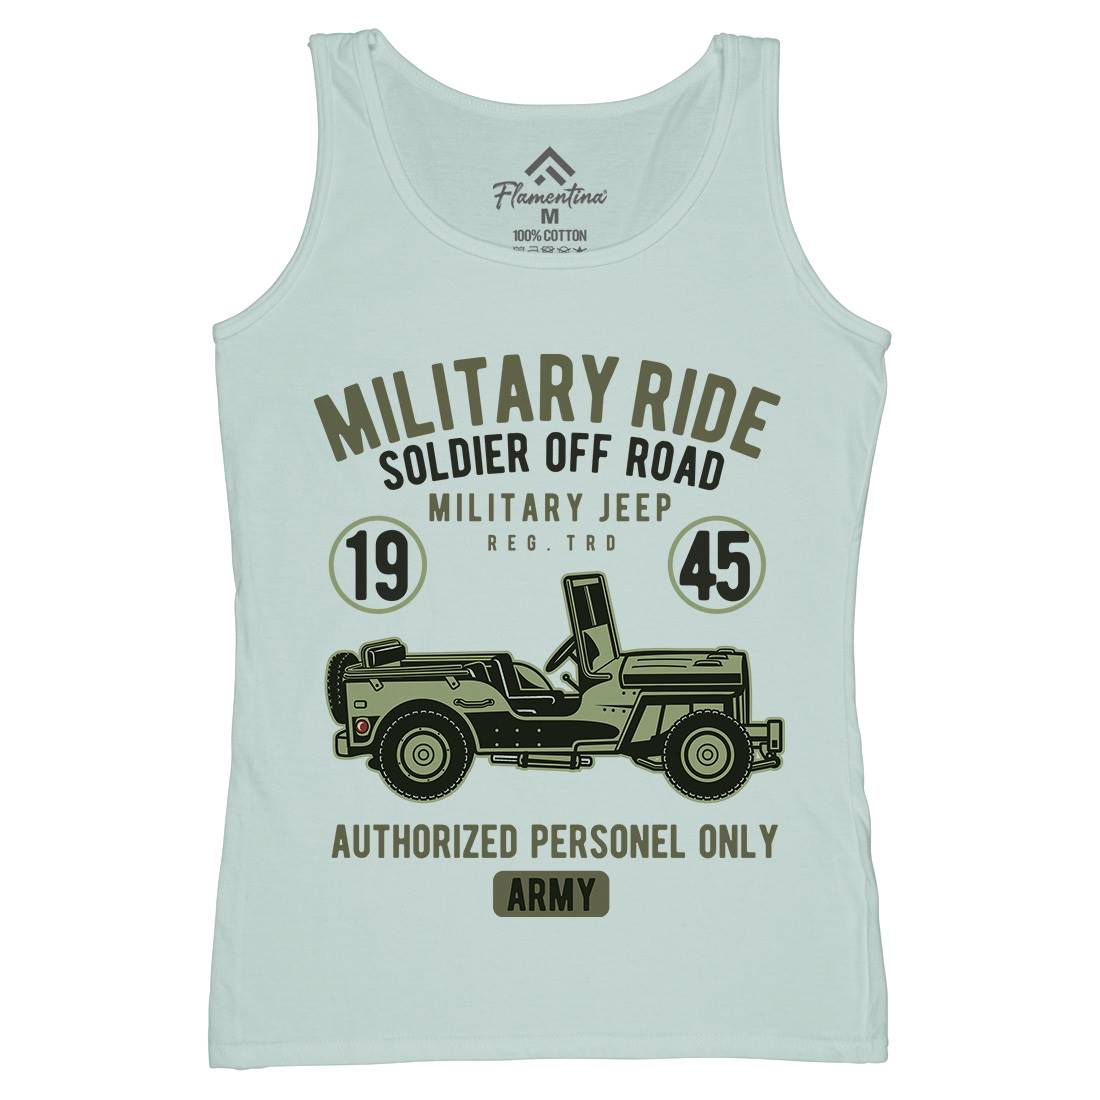 Military Ride Womens Organic Tank Top Vest Army D549